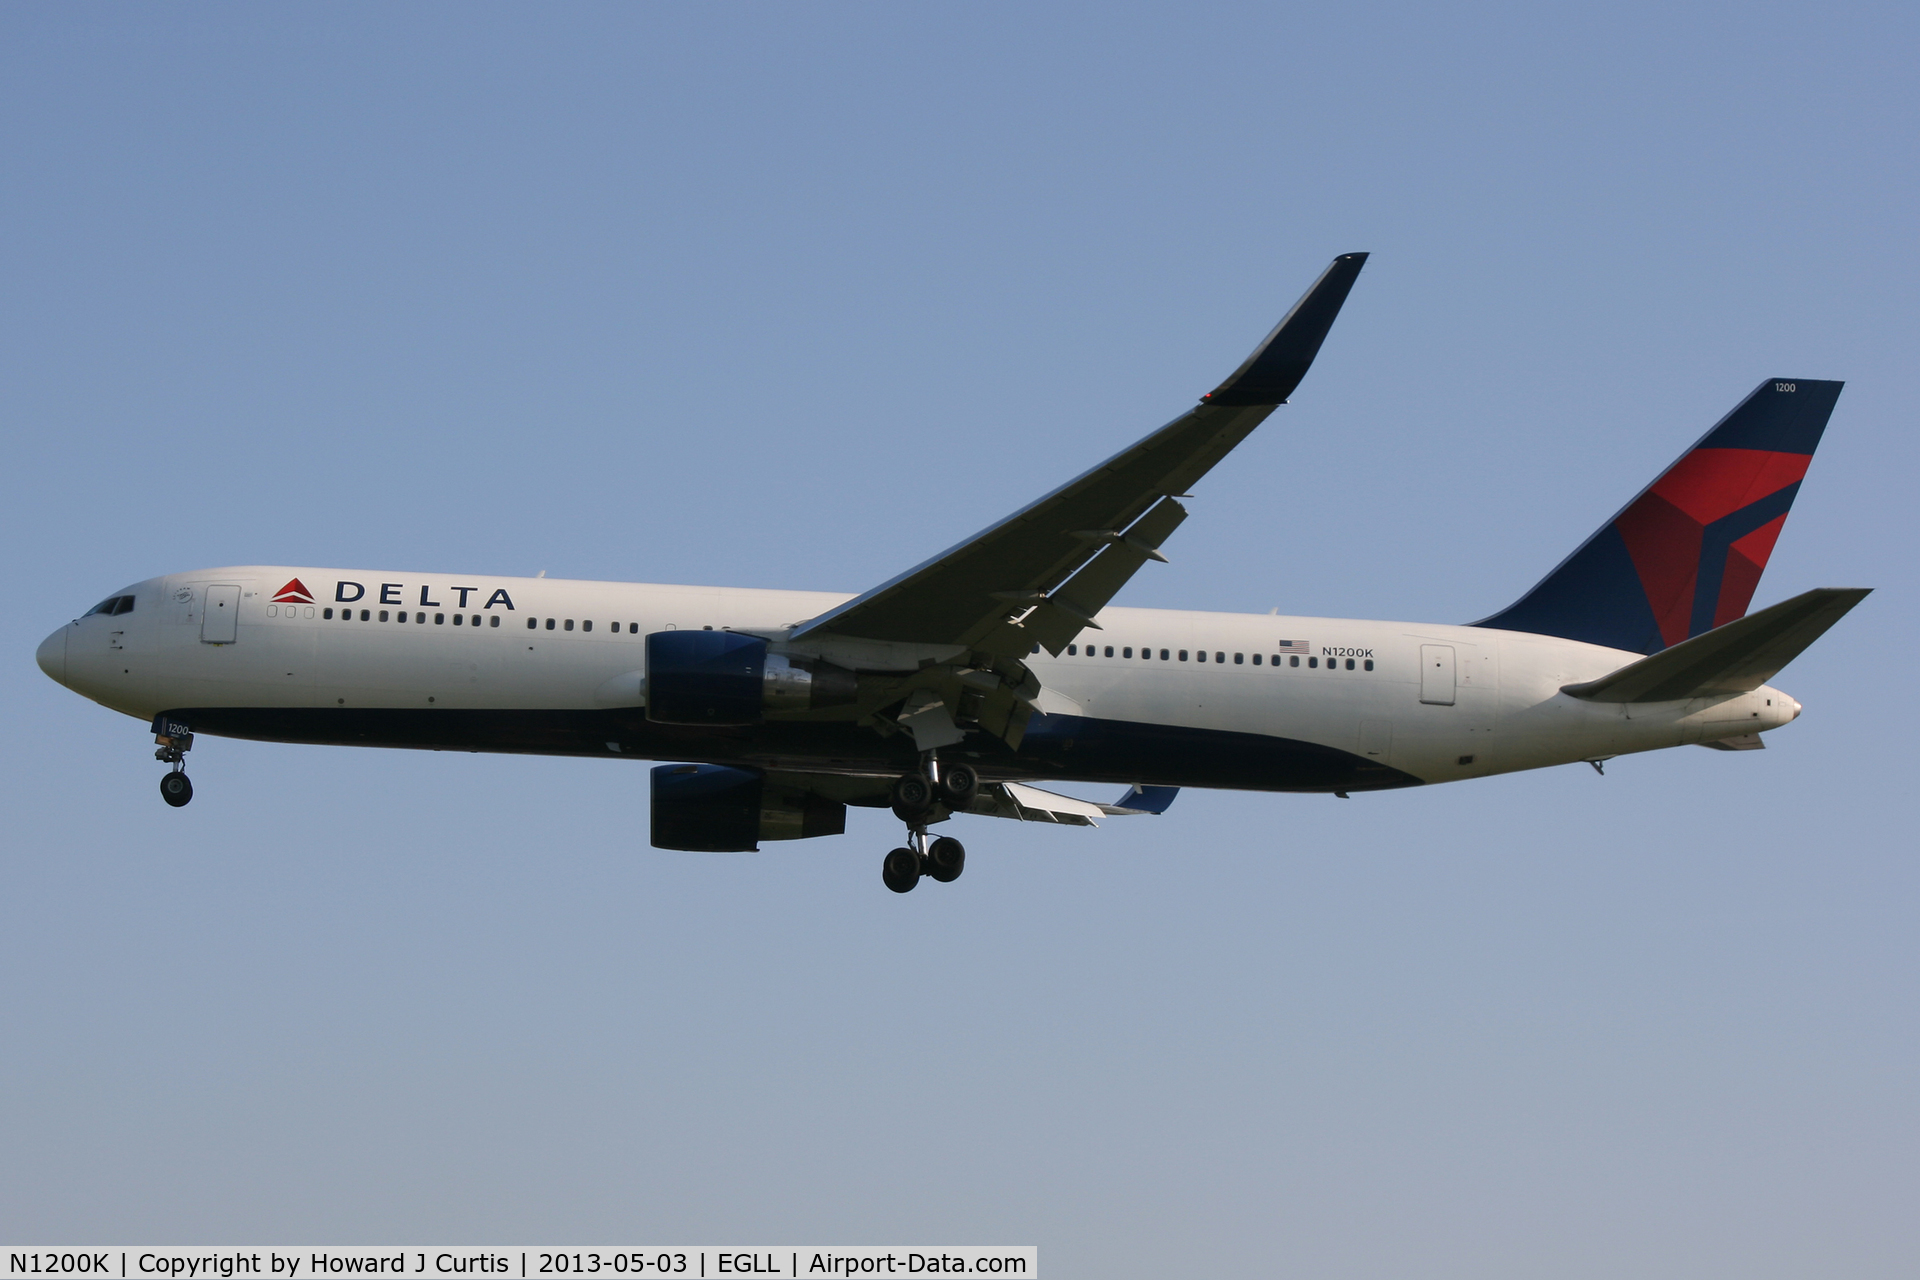 N1200K, 1998 Boeing 767-332 C/N 28457, Delta Airlines, on approach to runway 27L.